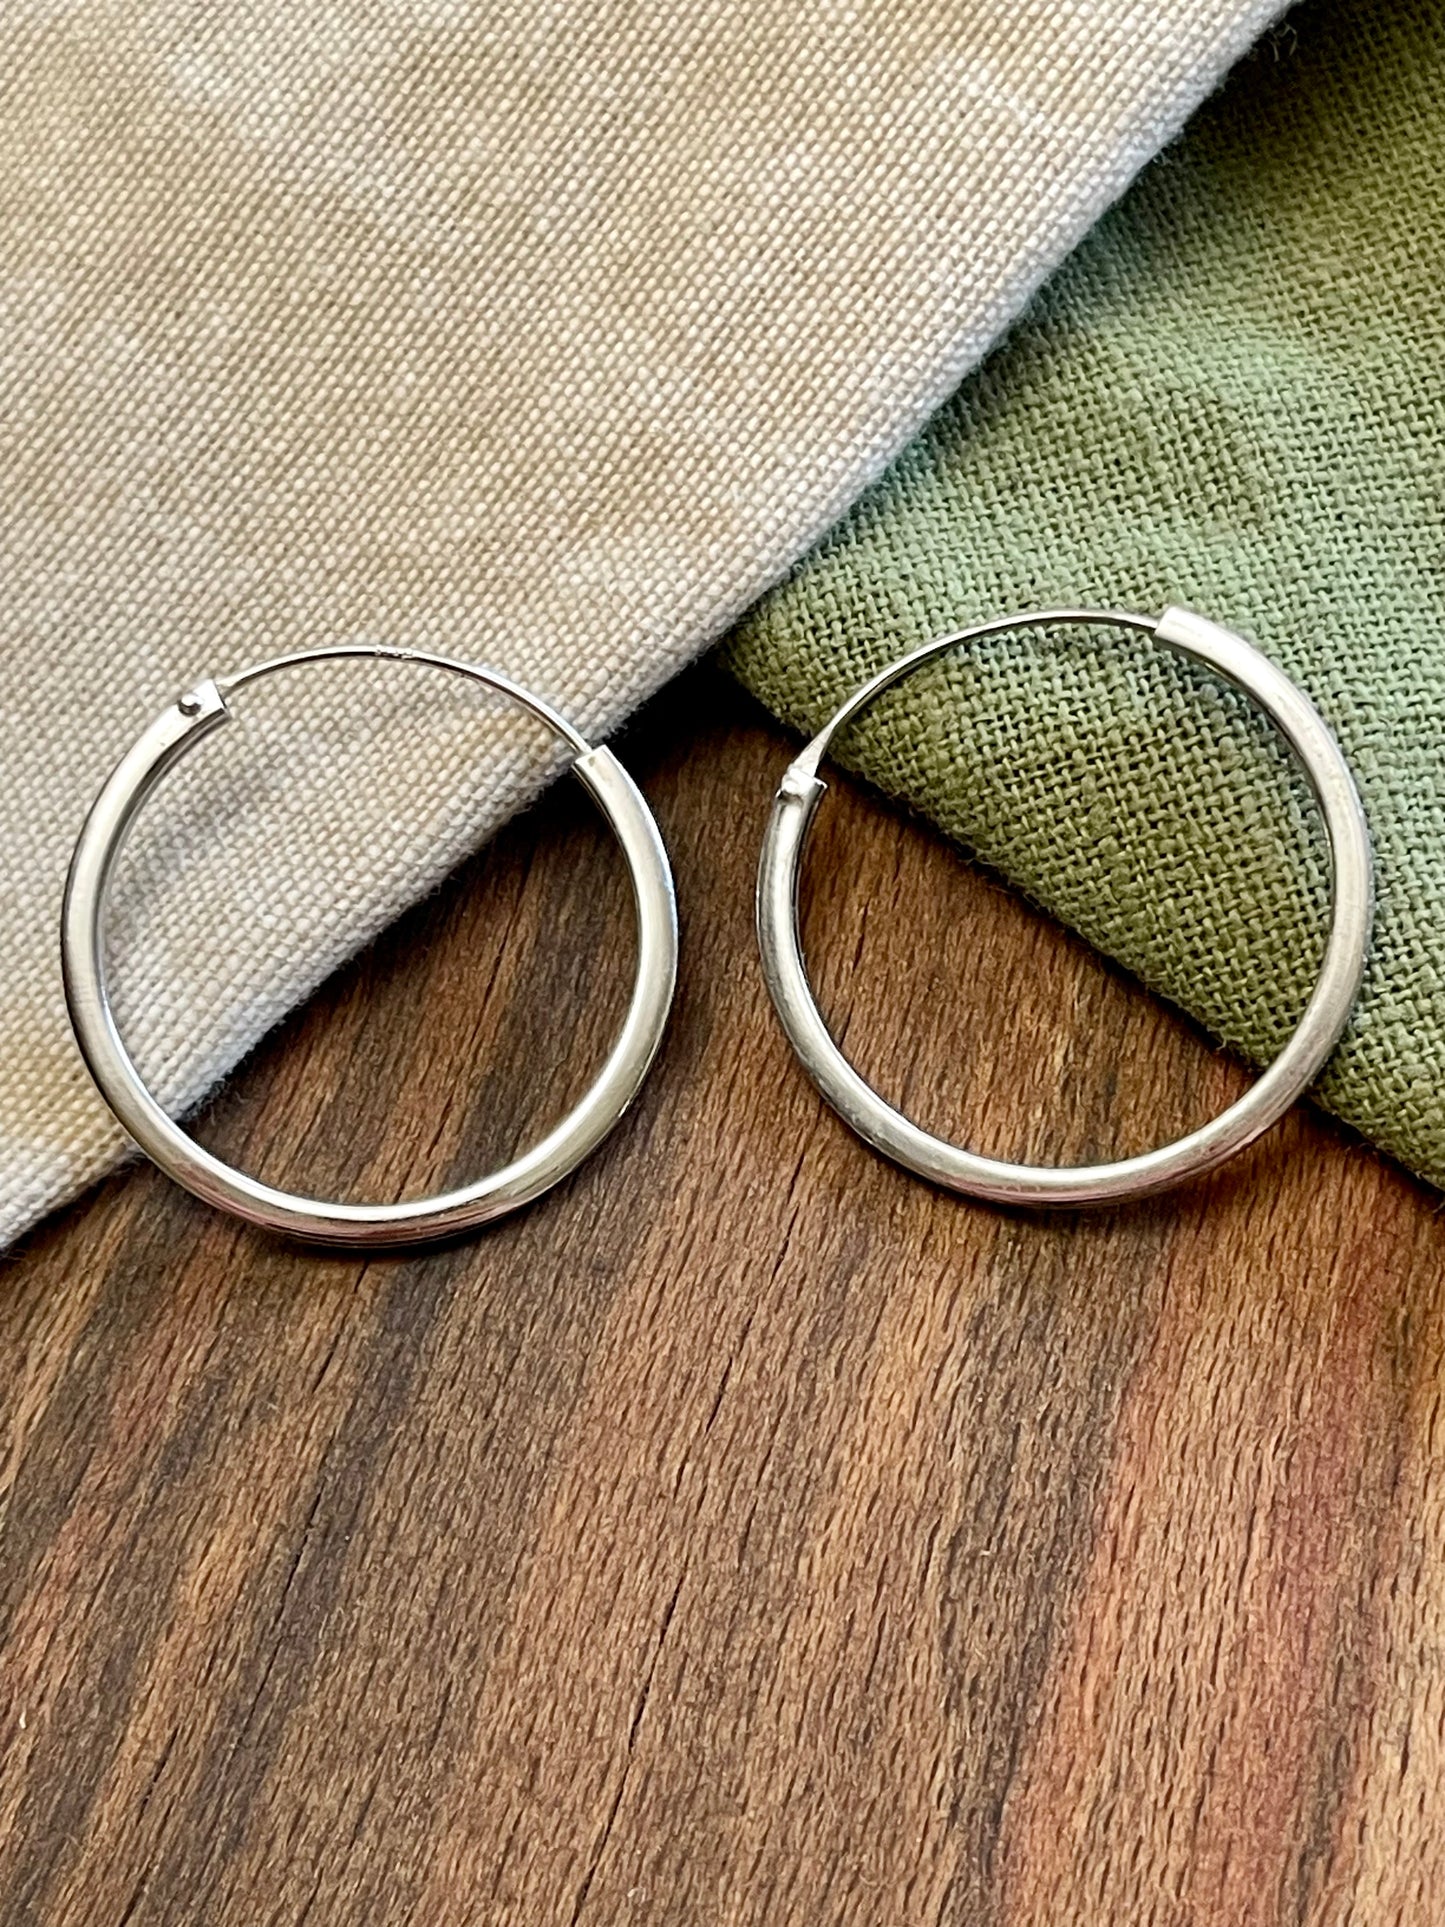 Nice Large Circle Round Hoops Earrings Solid Sterling 925 Silver Vintage Jewelry